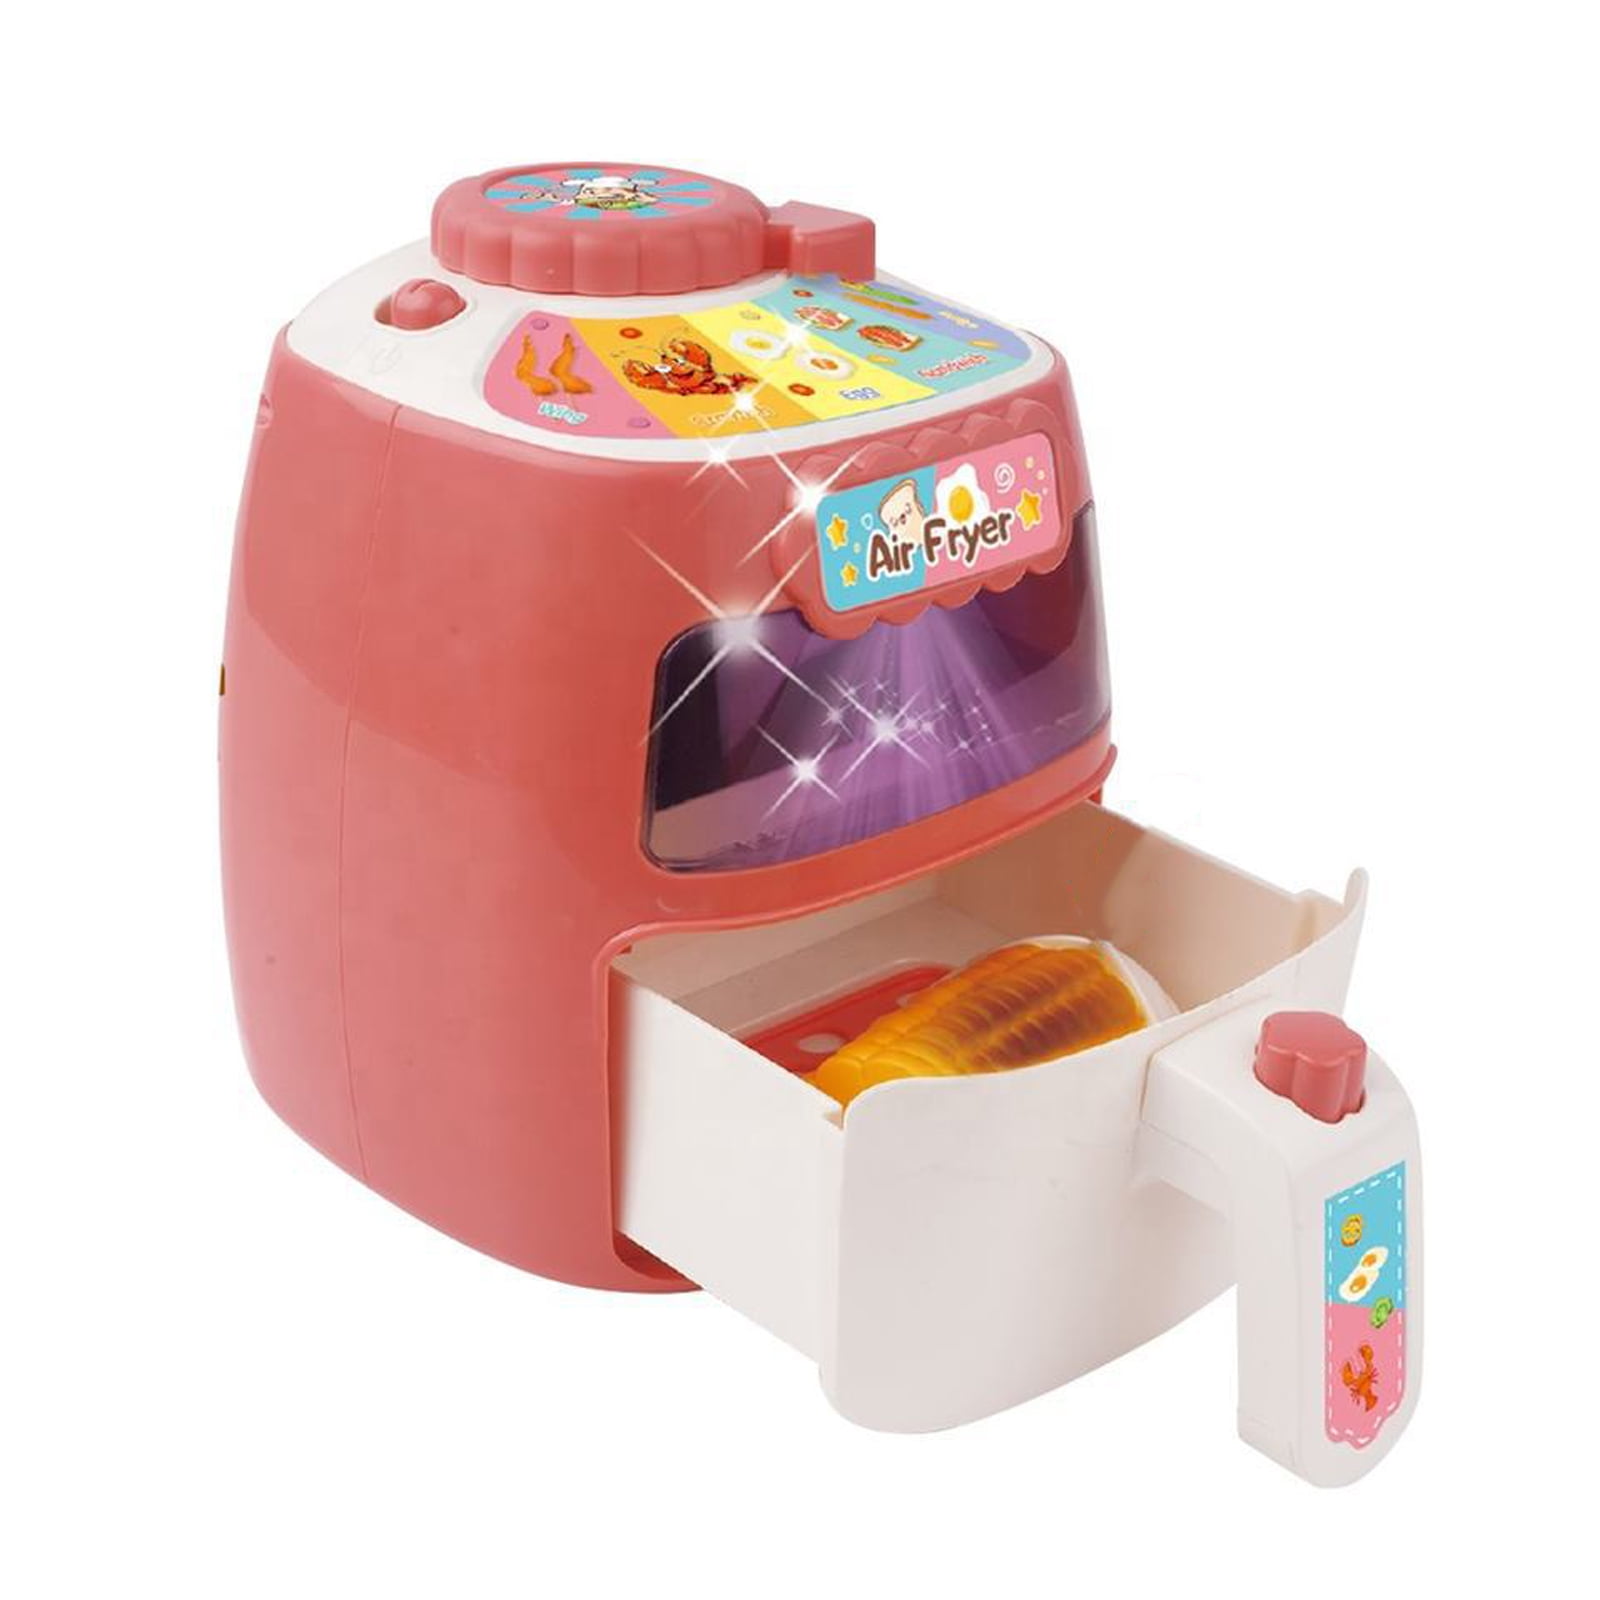 Kmart Just Dropped A Mini Air Fryer Toy For Your Kids And It's Adorable